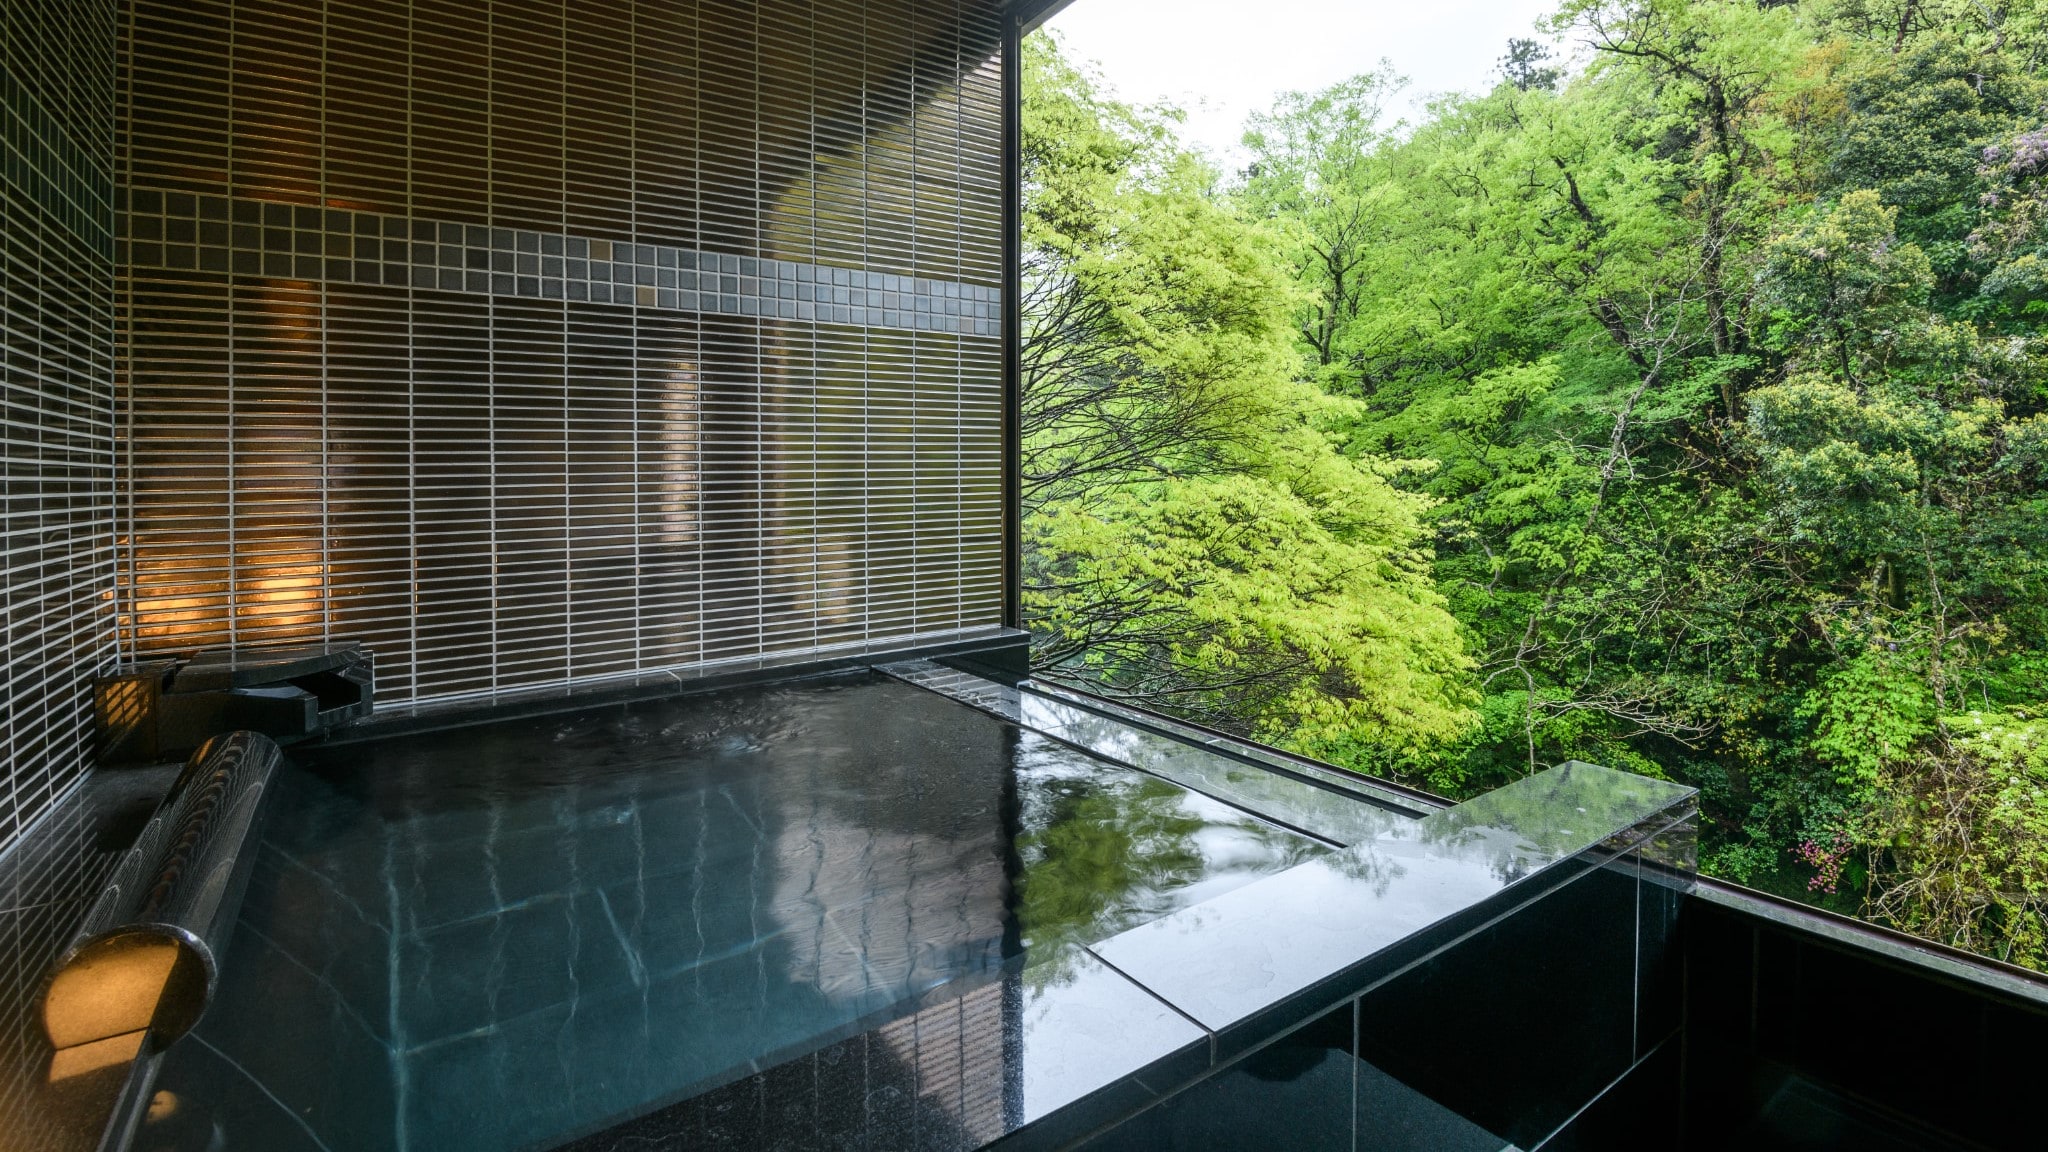 [Room meals & special room with open-air bath] Image of open-air bath